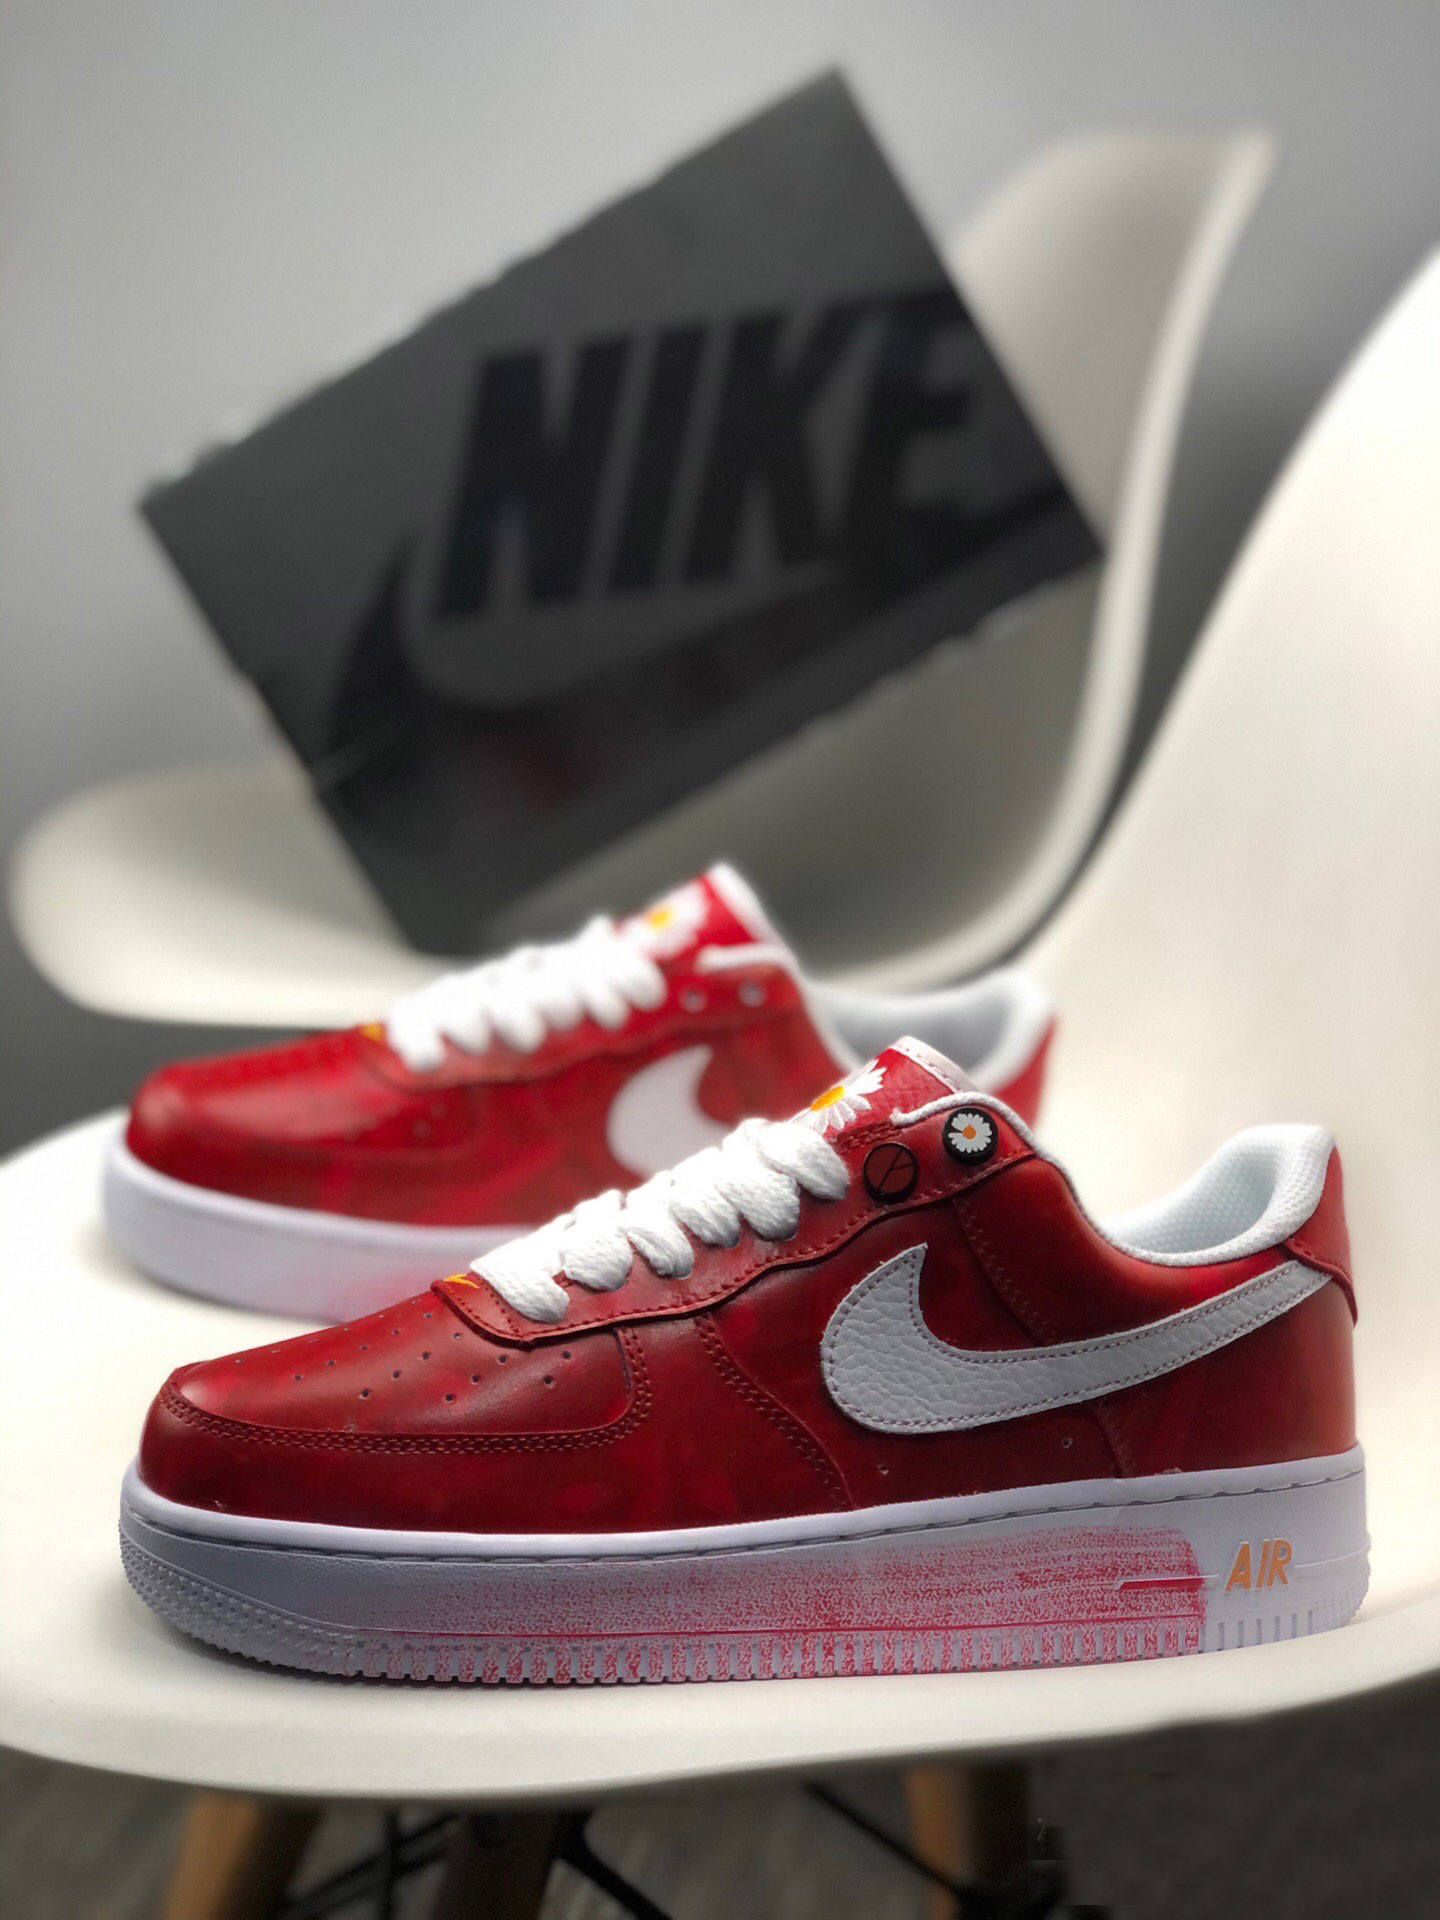 PEACEMINUSONE x Nike Air AF Force 1 "Para-Noise 2.0" Red Shoes